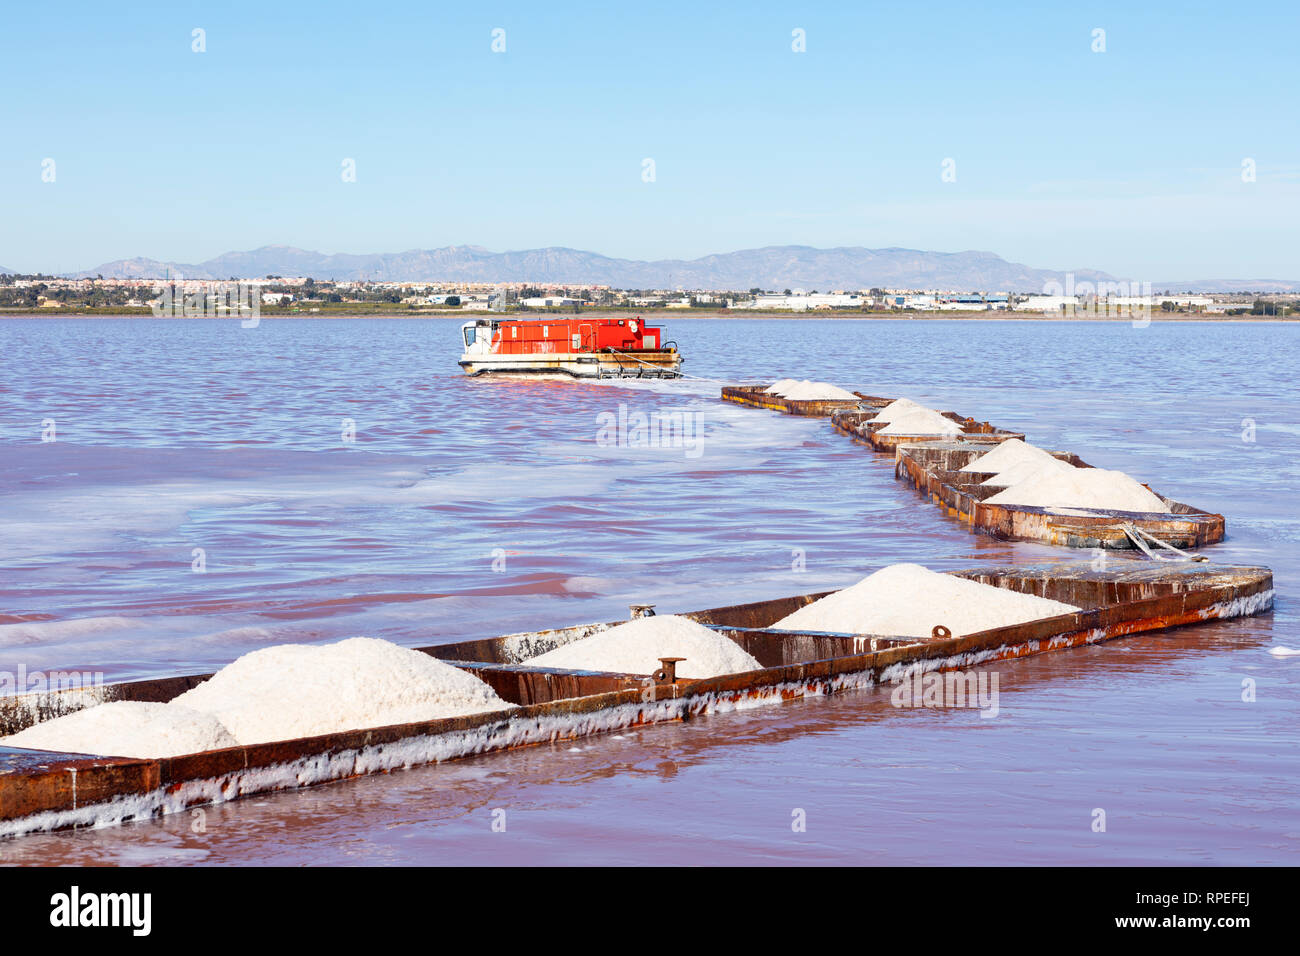 bargues of iron loaded with heaps of coarse salt just extracted from the lagoon Stock Photo